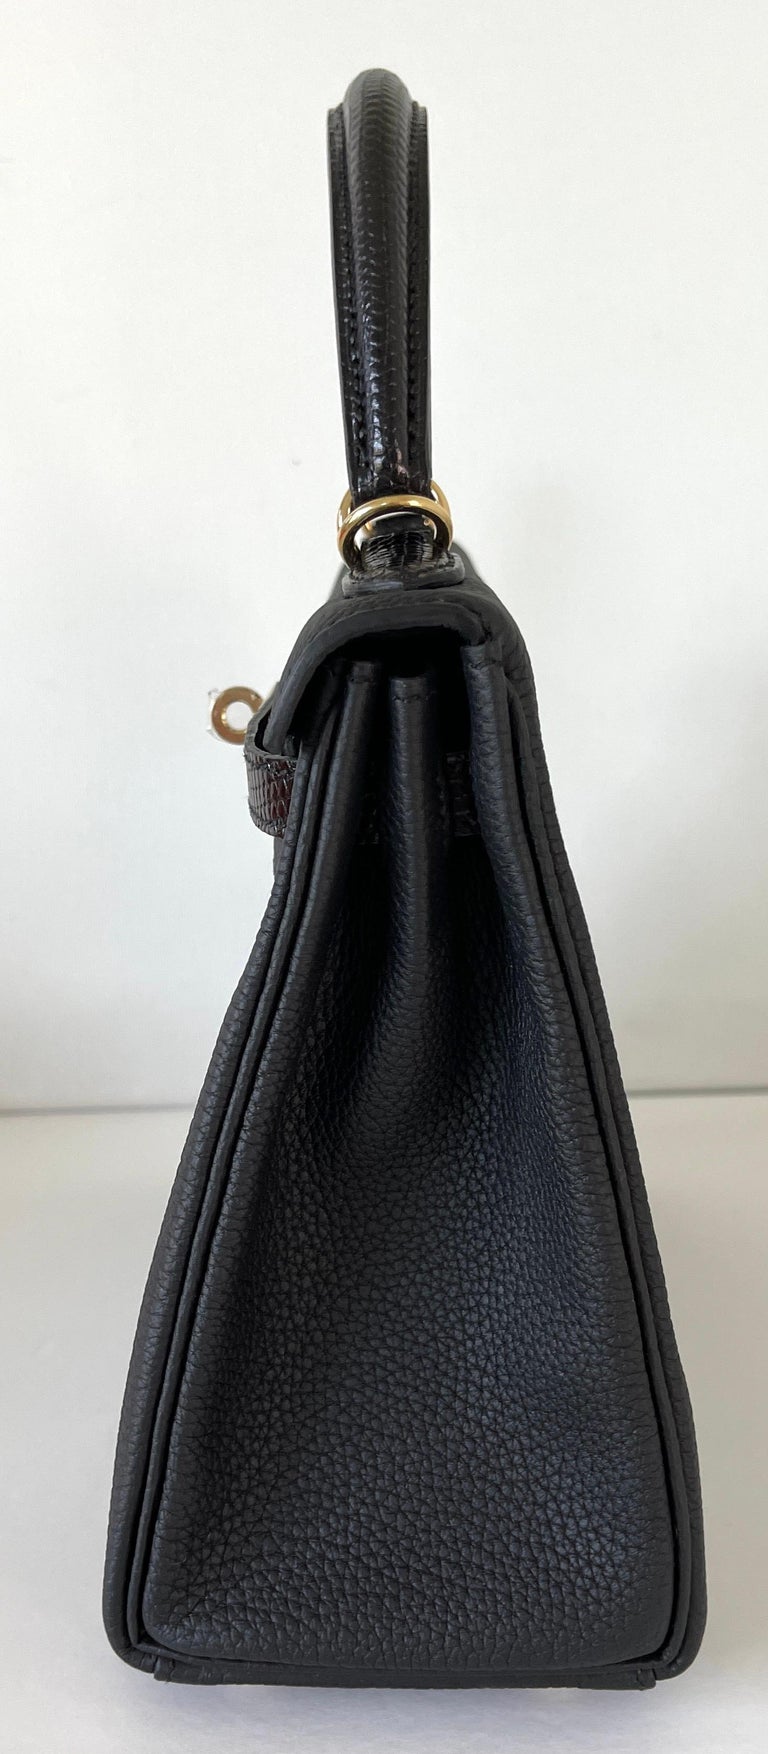 Hermes Kelly Touch 25 Black Lizard Togo Permabrass 3